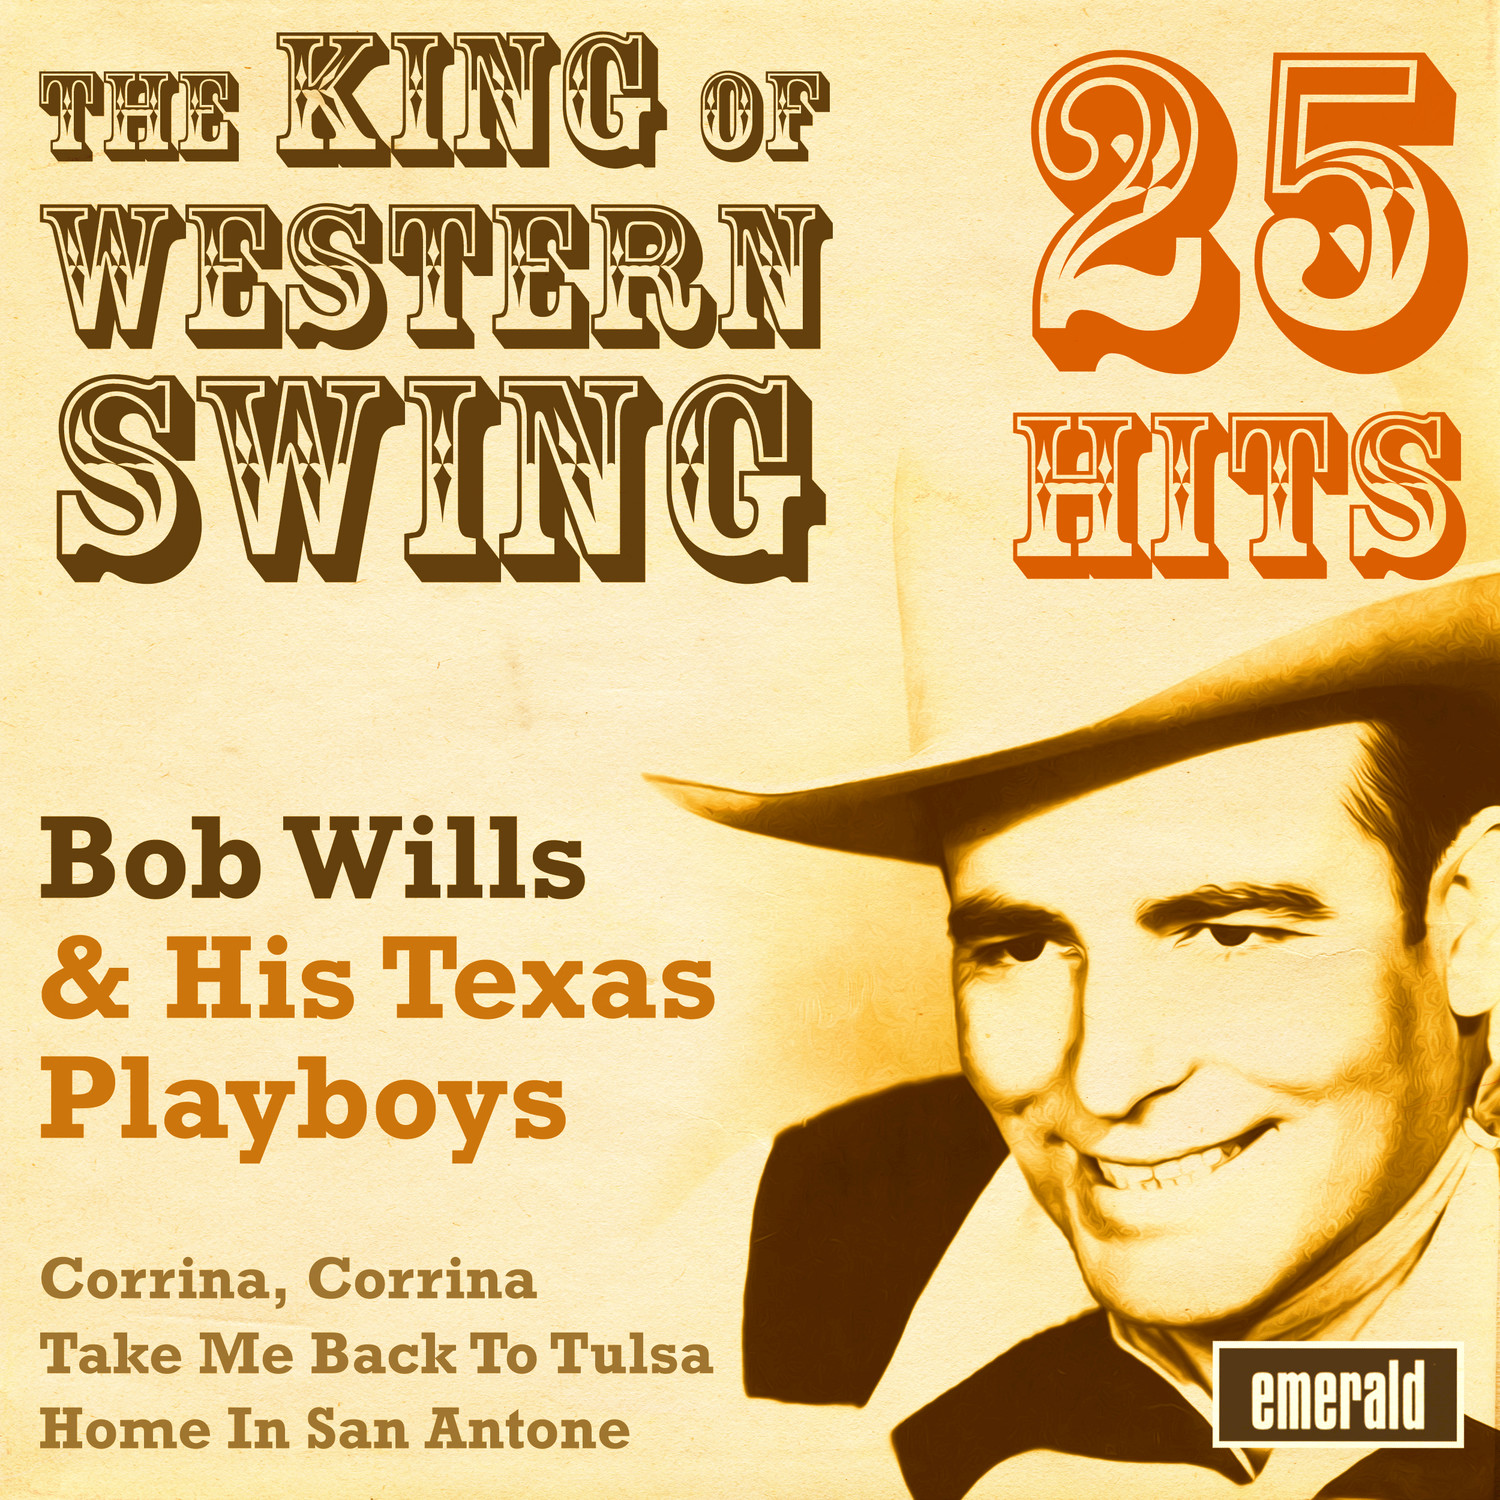 The King of Western Swing - 25 Hits